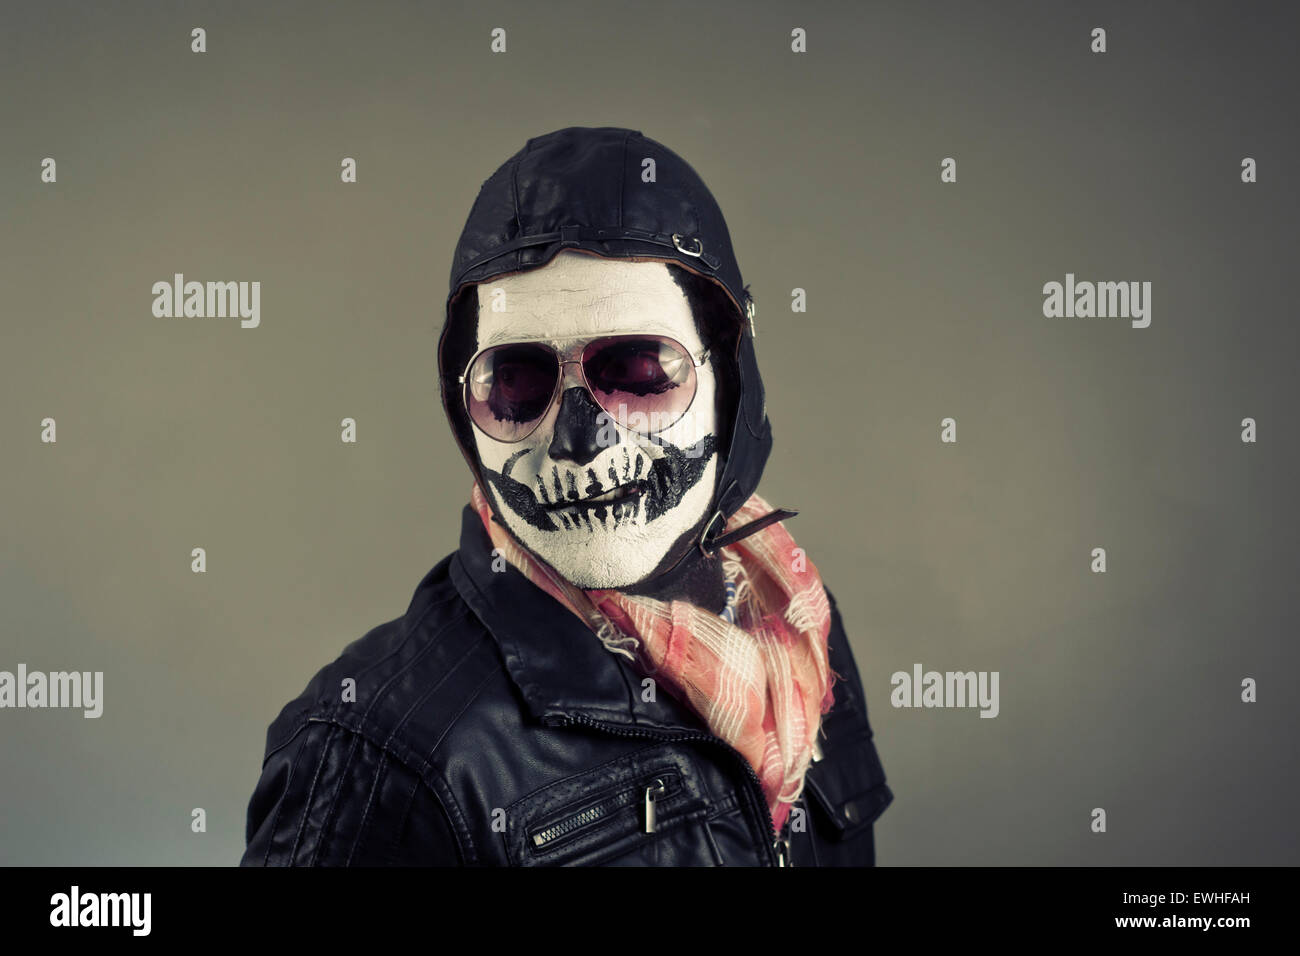 Disapproving aviator with face painted as human skull Stock Photo